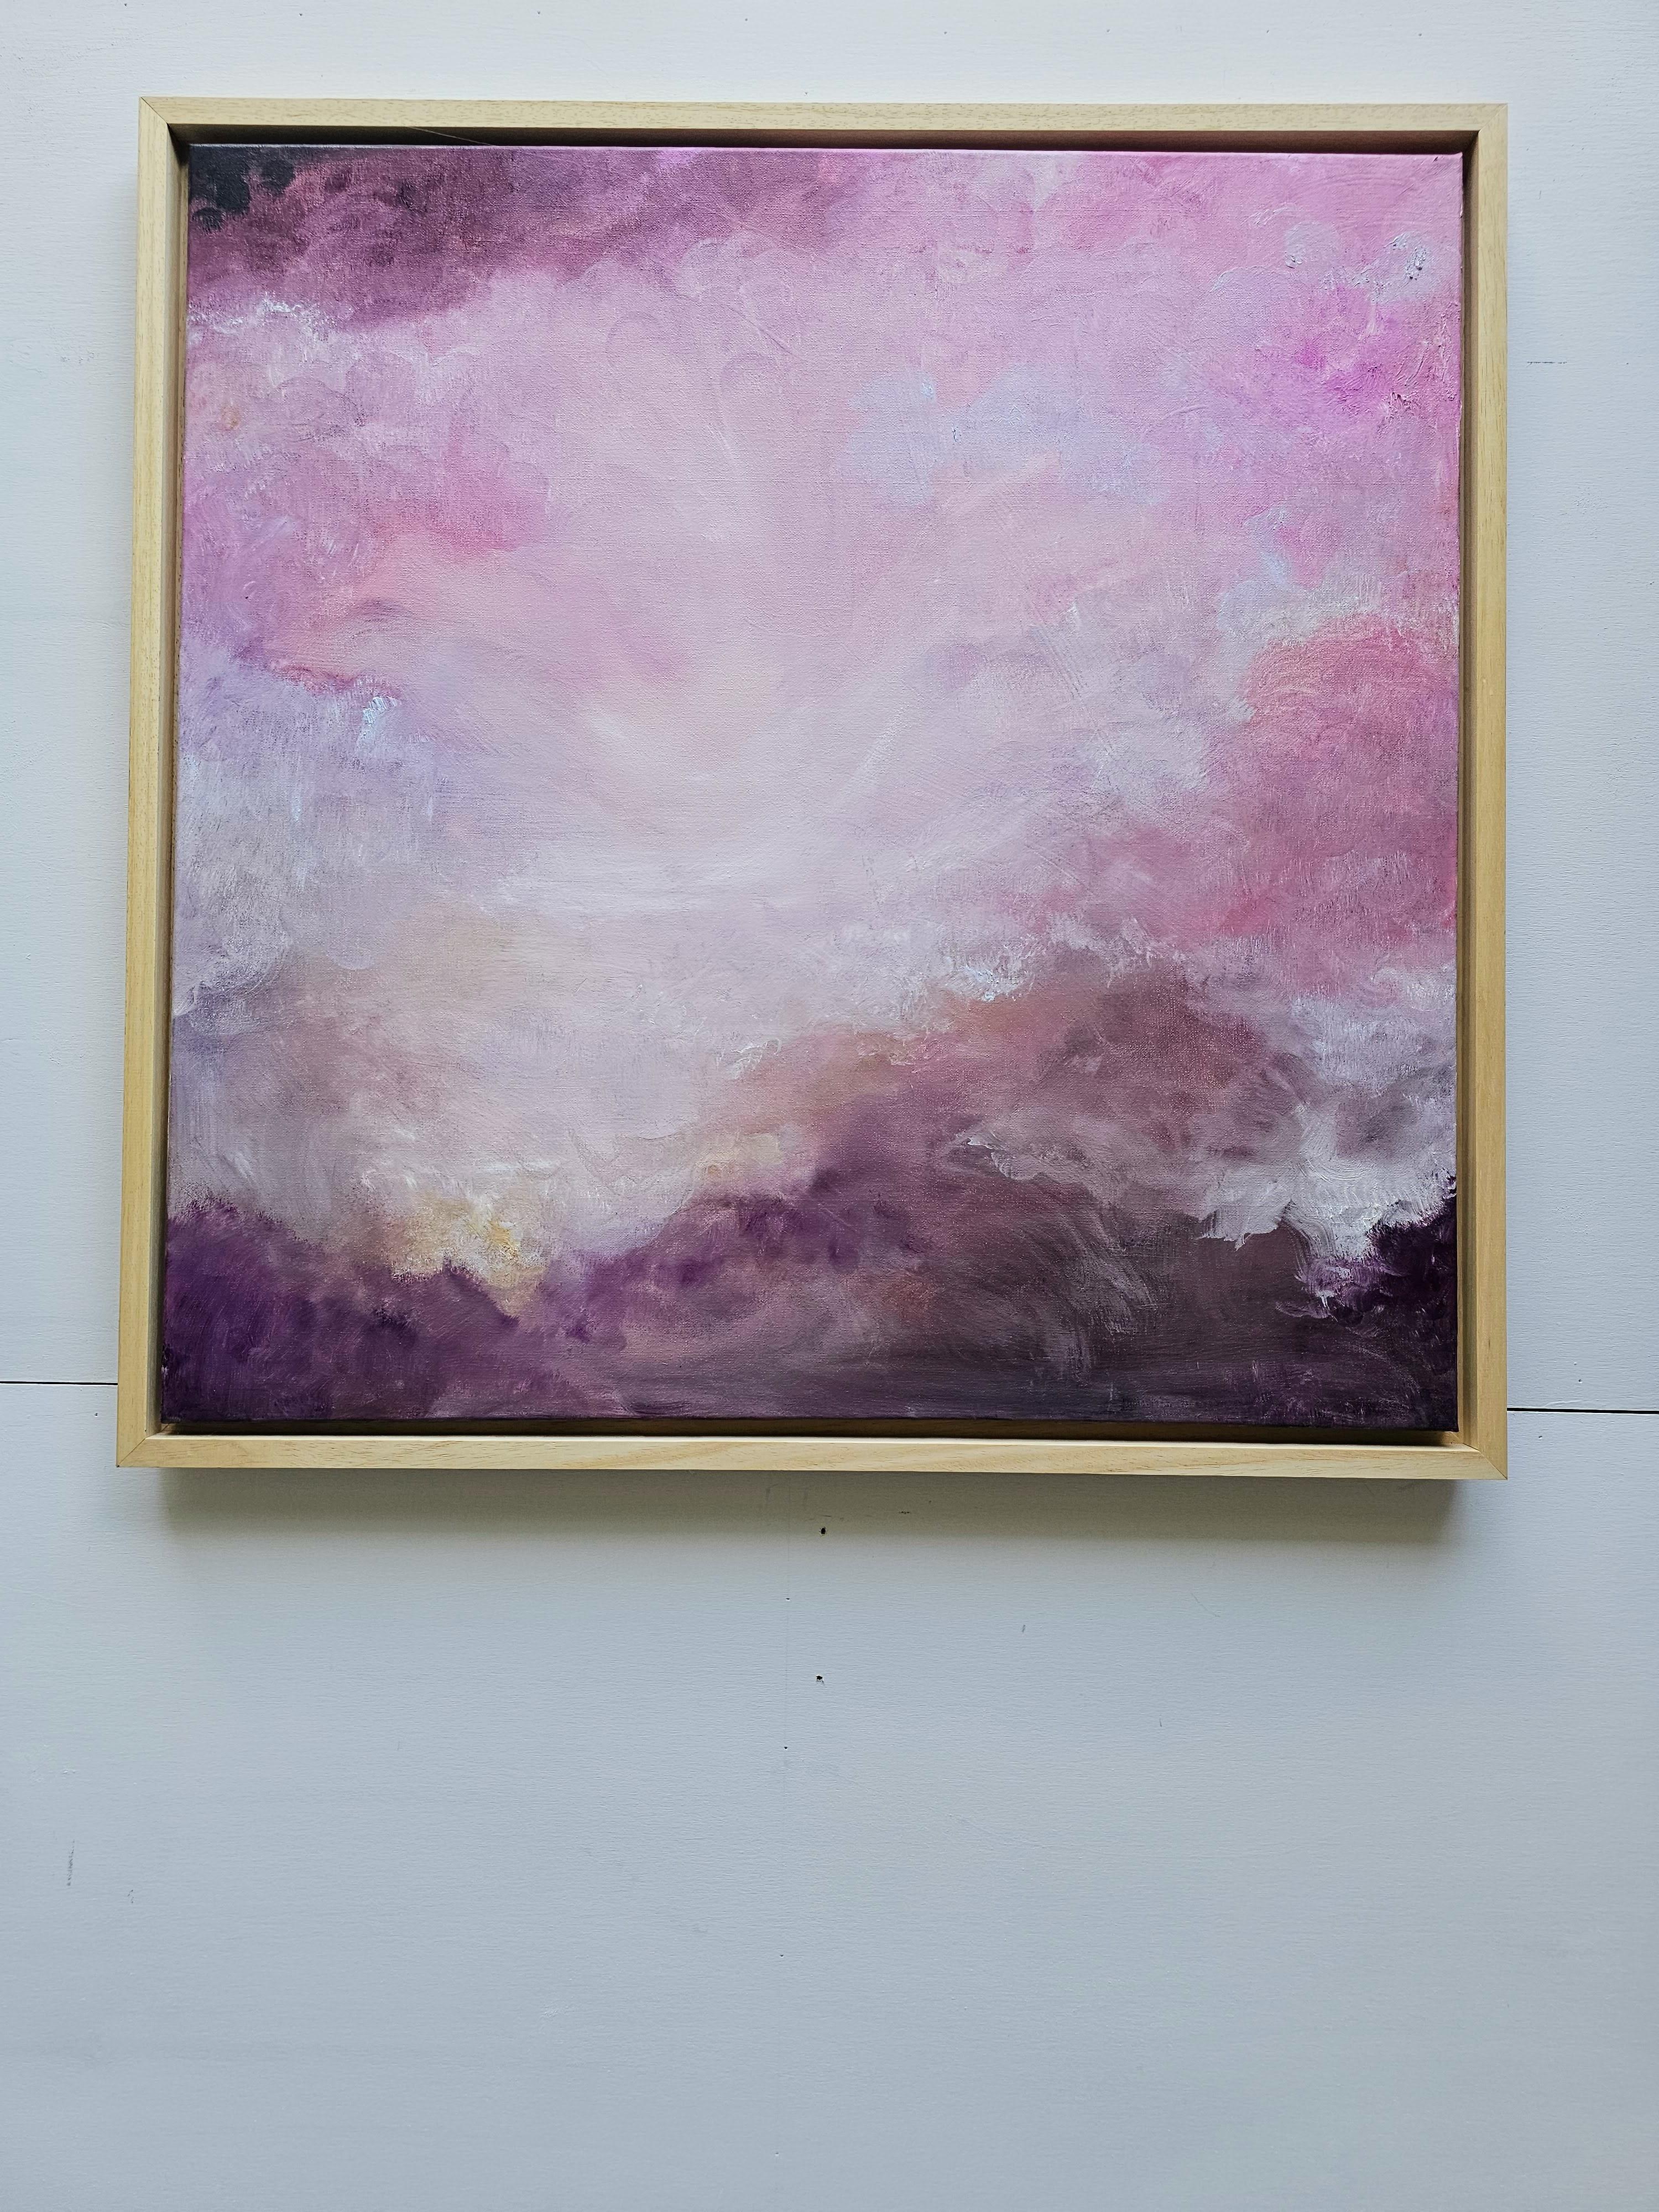 Venus sunrise - soft pink and gold abstract sky painting - Painting by Jennifer L. Baker